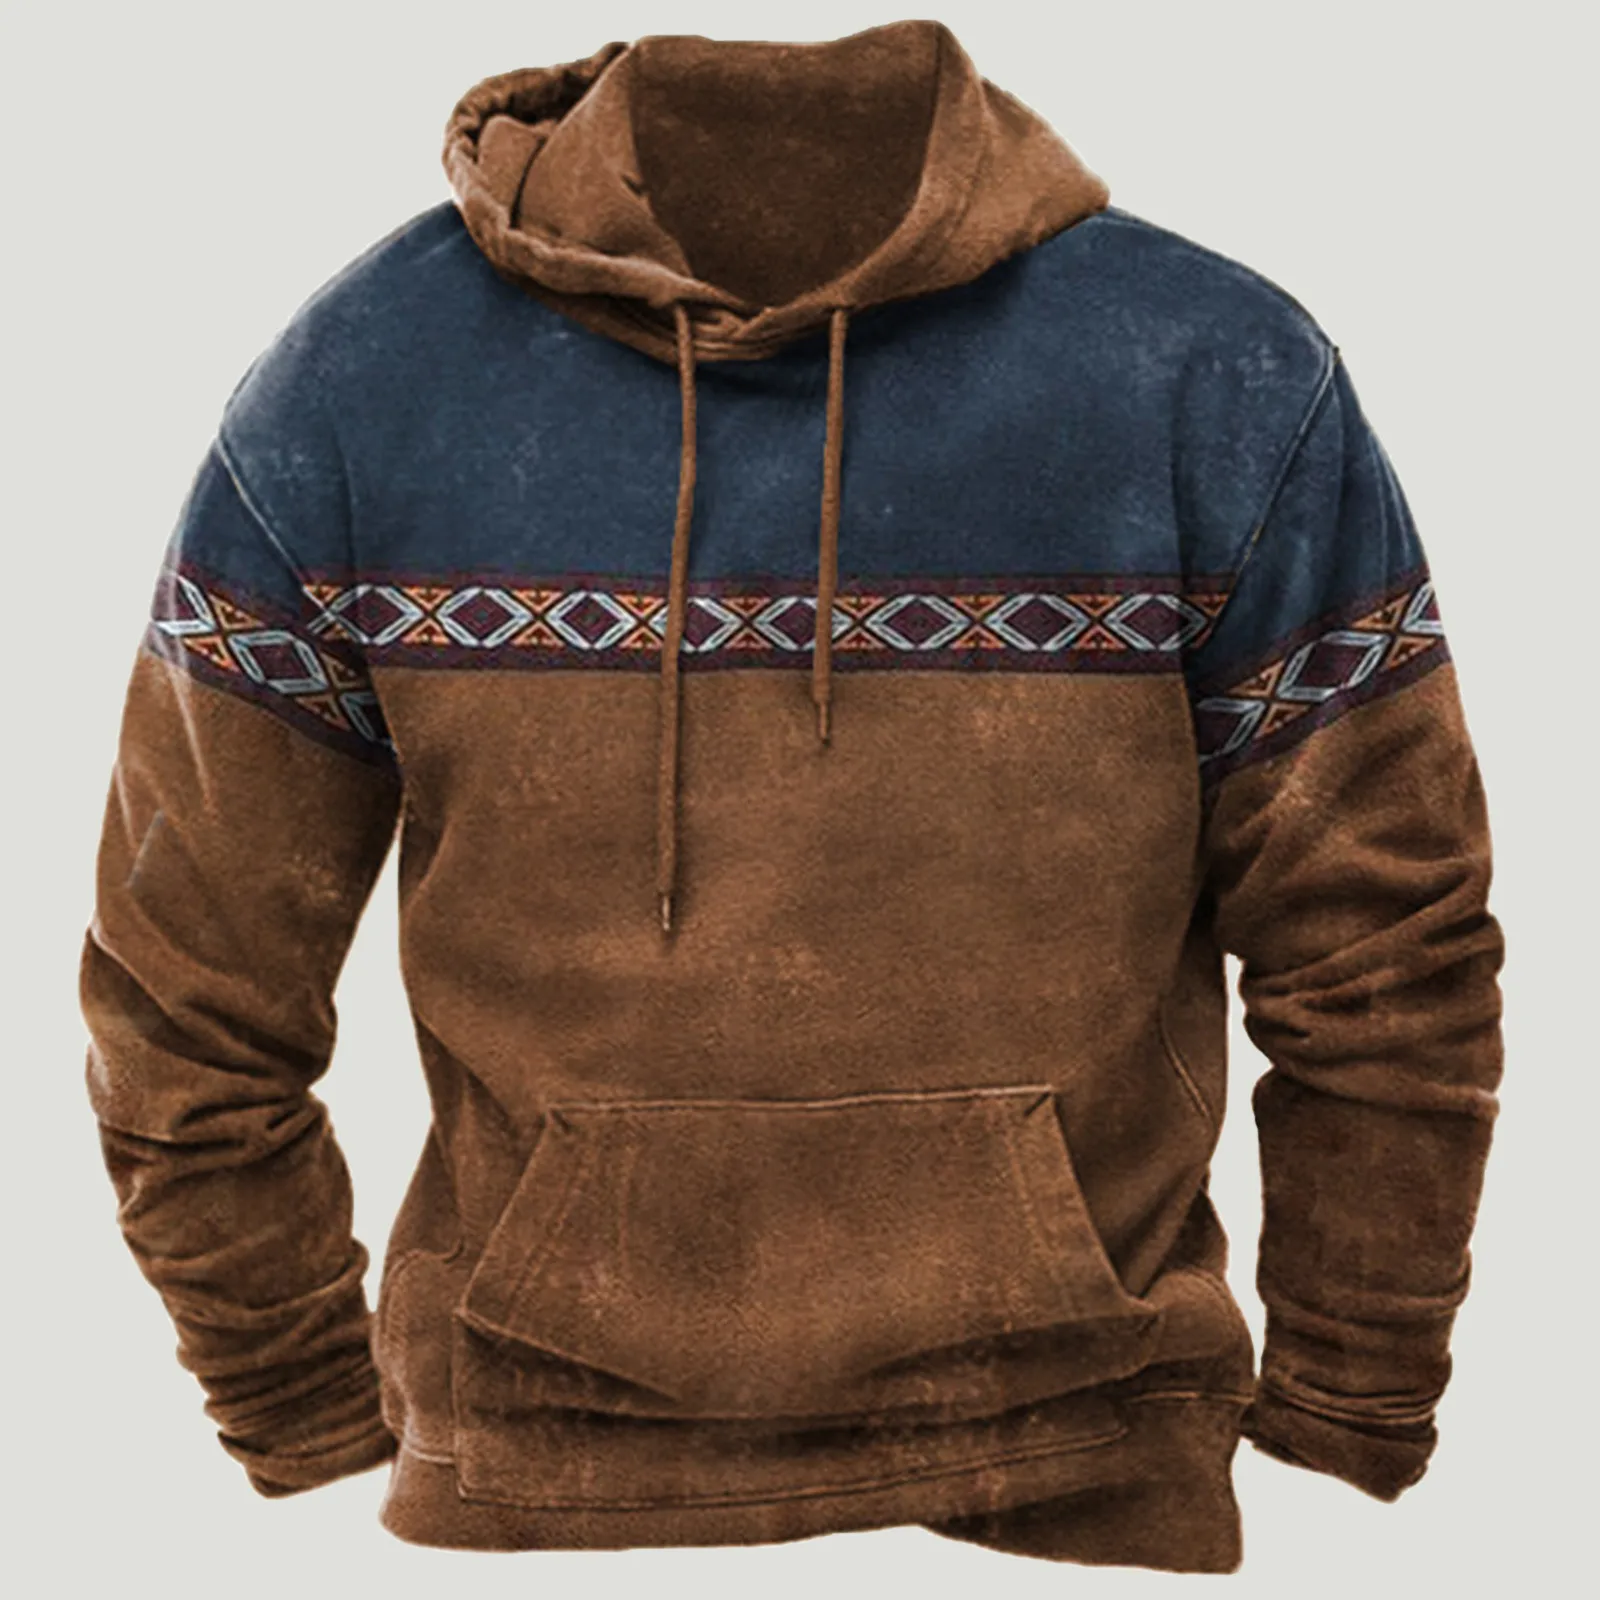 Autumn Hoodies Men Sweatshirt Colorblock Aztec Ethnic Stylish Male Clothing Long Sleeve Shirt Casual Hooded Pullover Blouse Tops